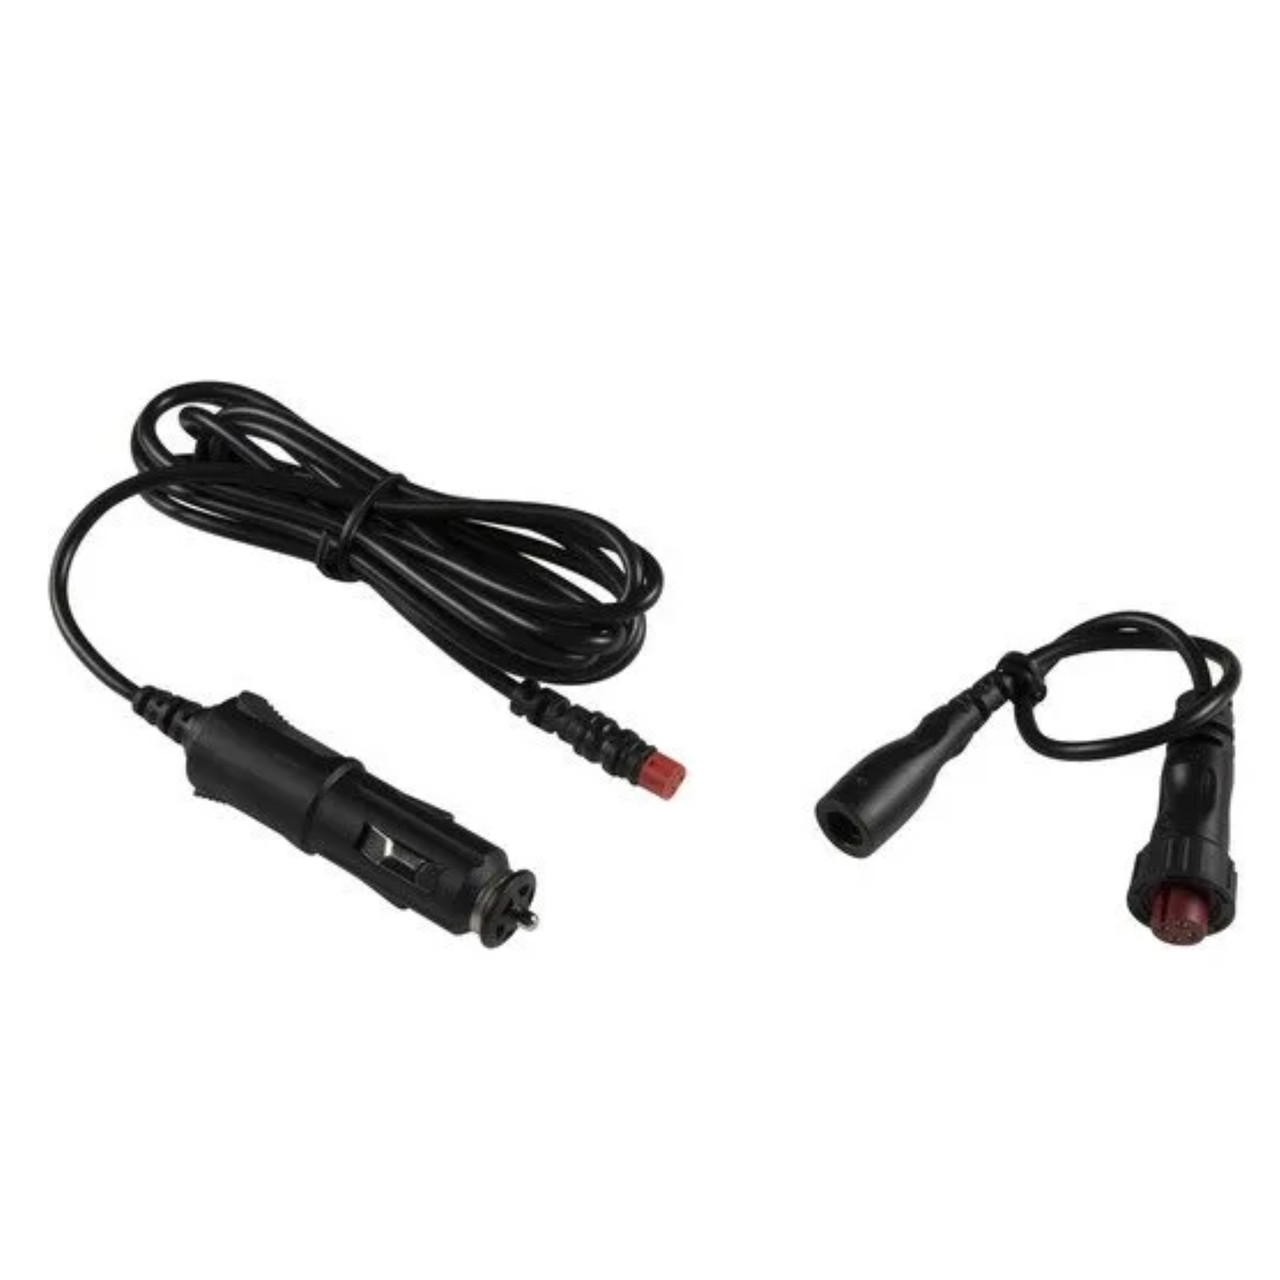 Garmin New OEM Vehicle Power Cable, 010-12931-00